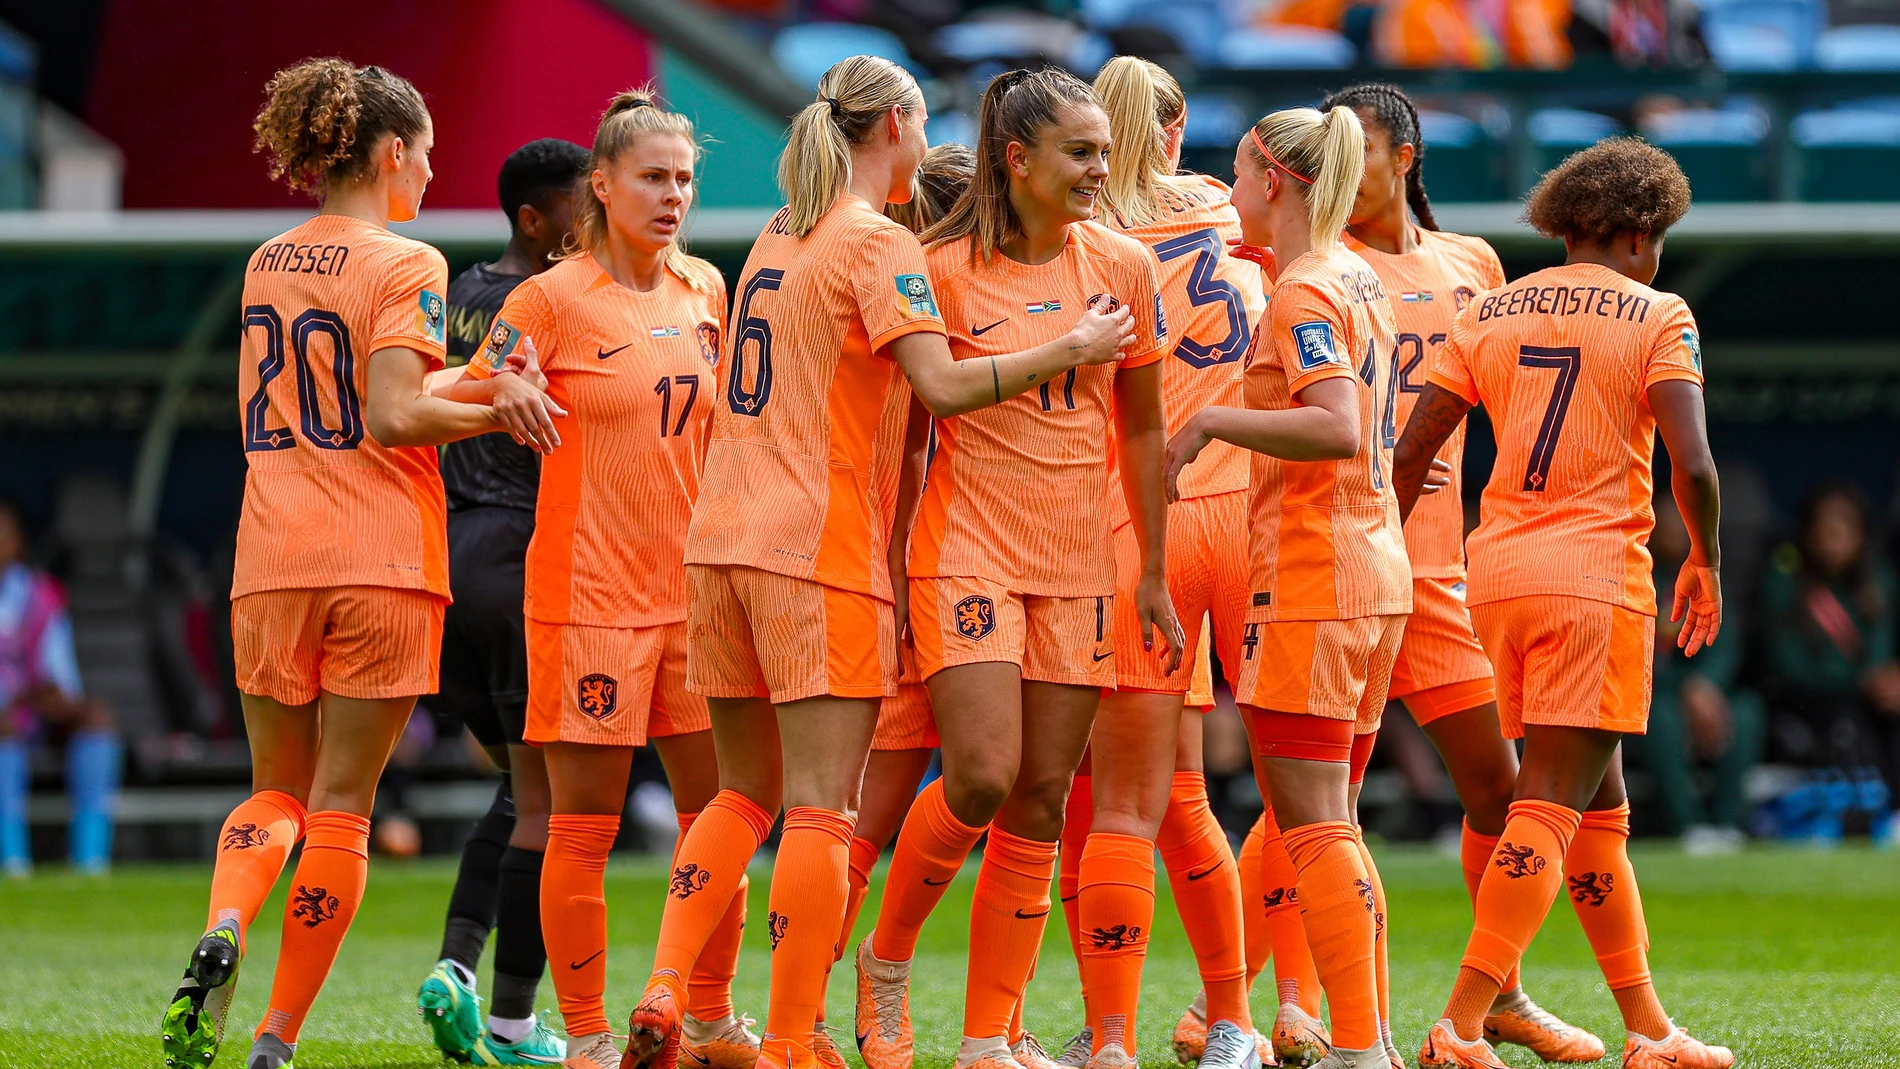 Jill Roord (6) of Netherlands scores a goal and celebrates 1-0 during the 2023 FIFA Women’s World Cup, round of 16 football match between Netherlands and South Africa on 6 August 2023 at Sydney Football Stadium, Sydney, Australia - Photo Nigel Keene / ProSportsImages / DPPI Nigel Keene / Pro Sports Images / Afp7 06/08/2023 ONLY FOR USE IN SPAIN